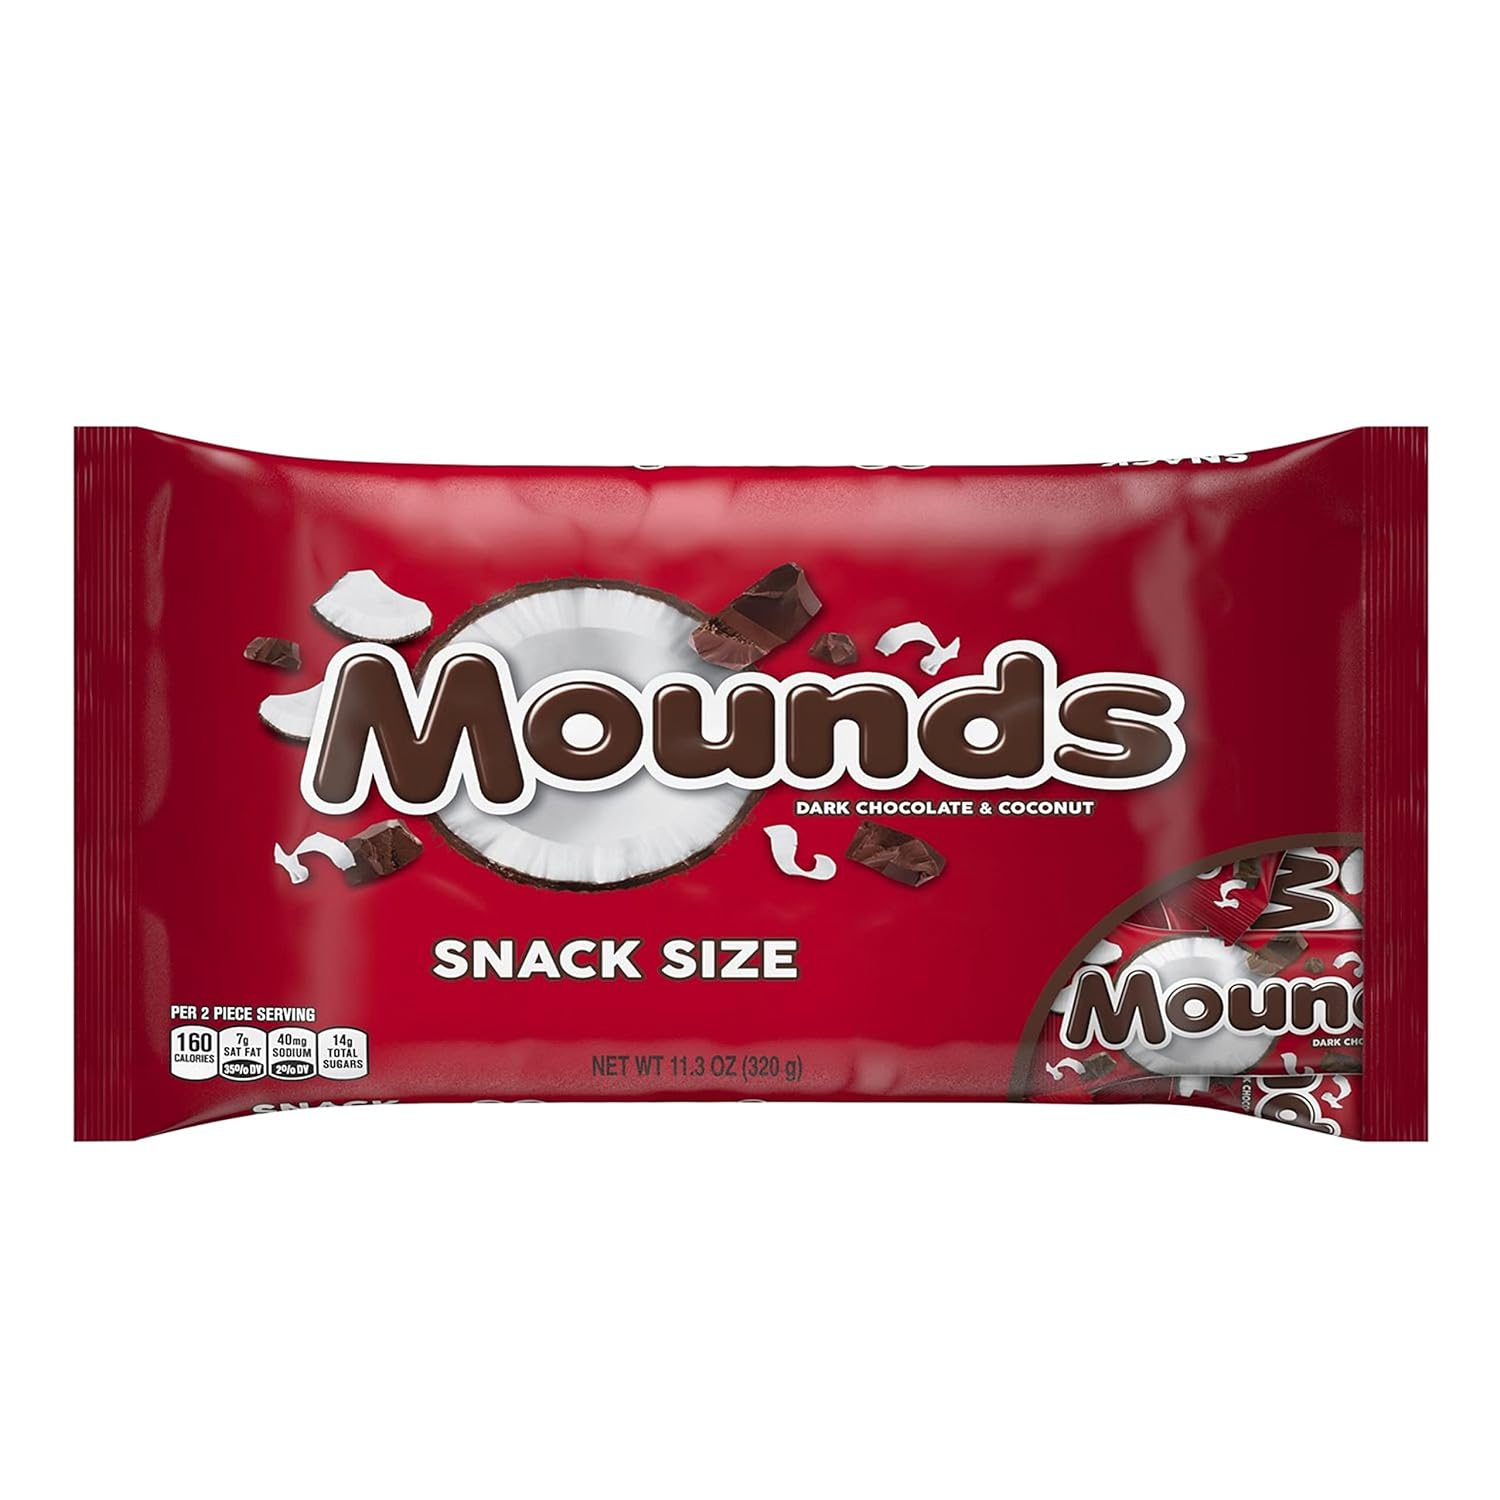 Mounds Dark Chocolate and Coconut Snack Size 11.3 Oz Bag